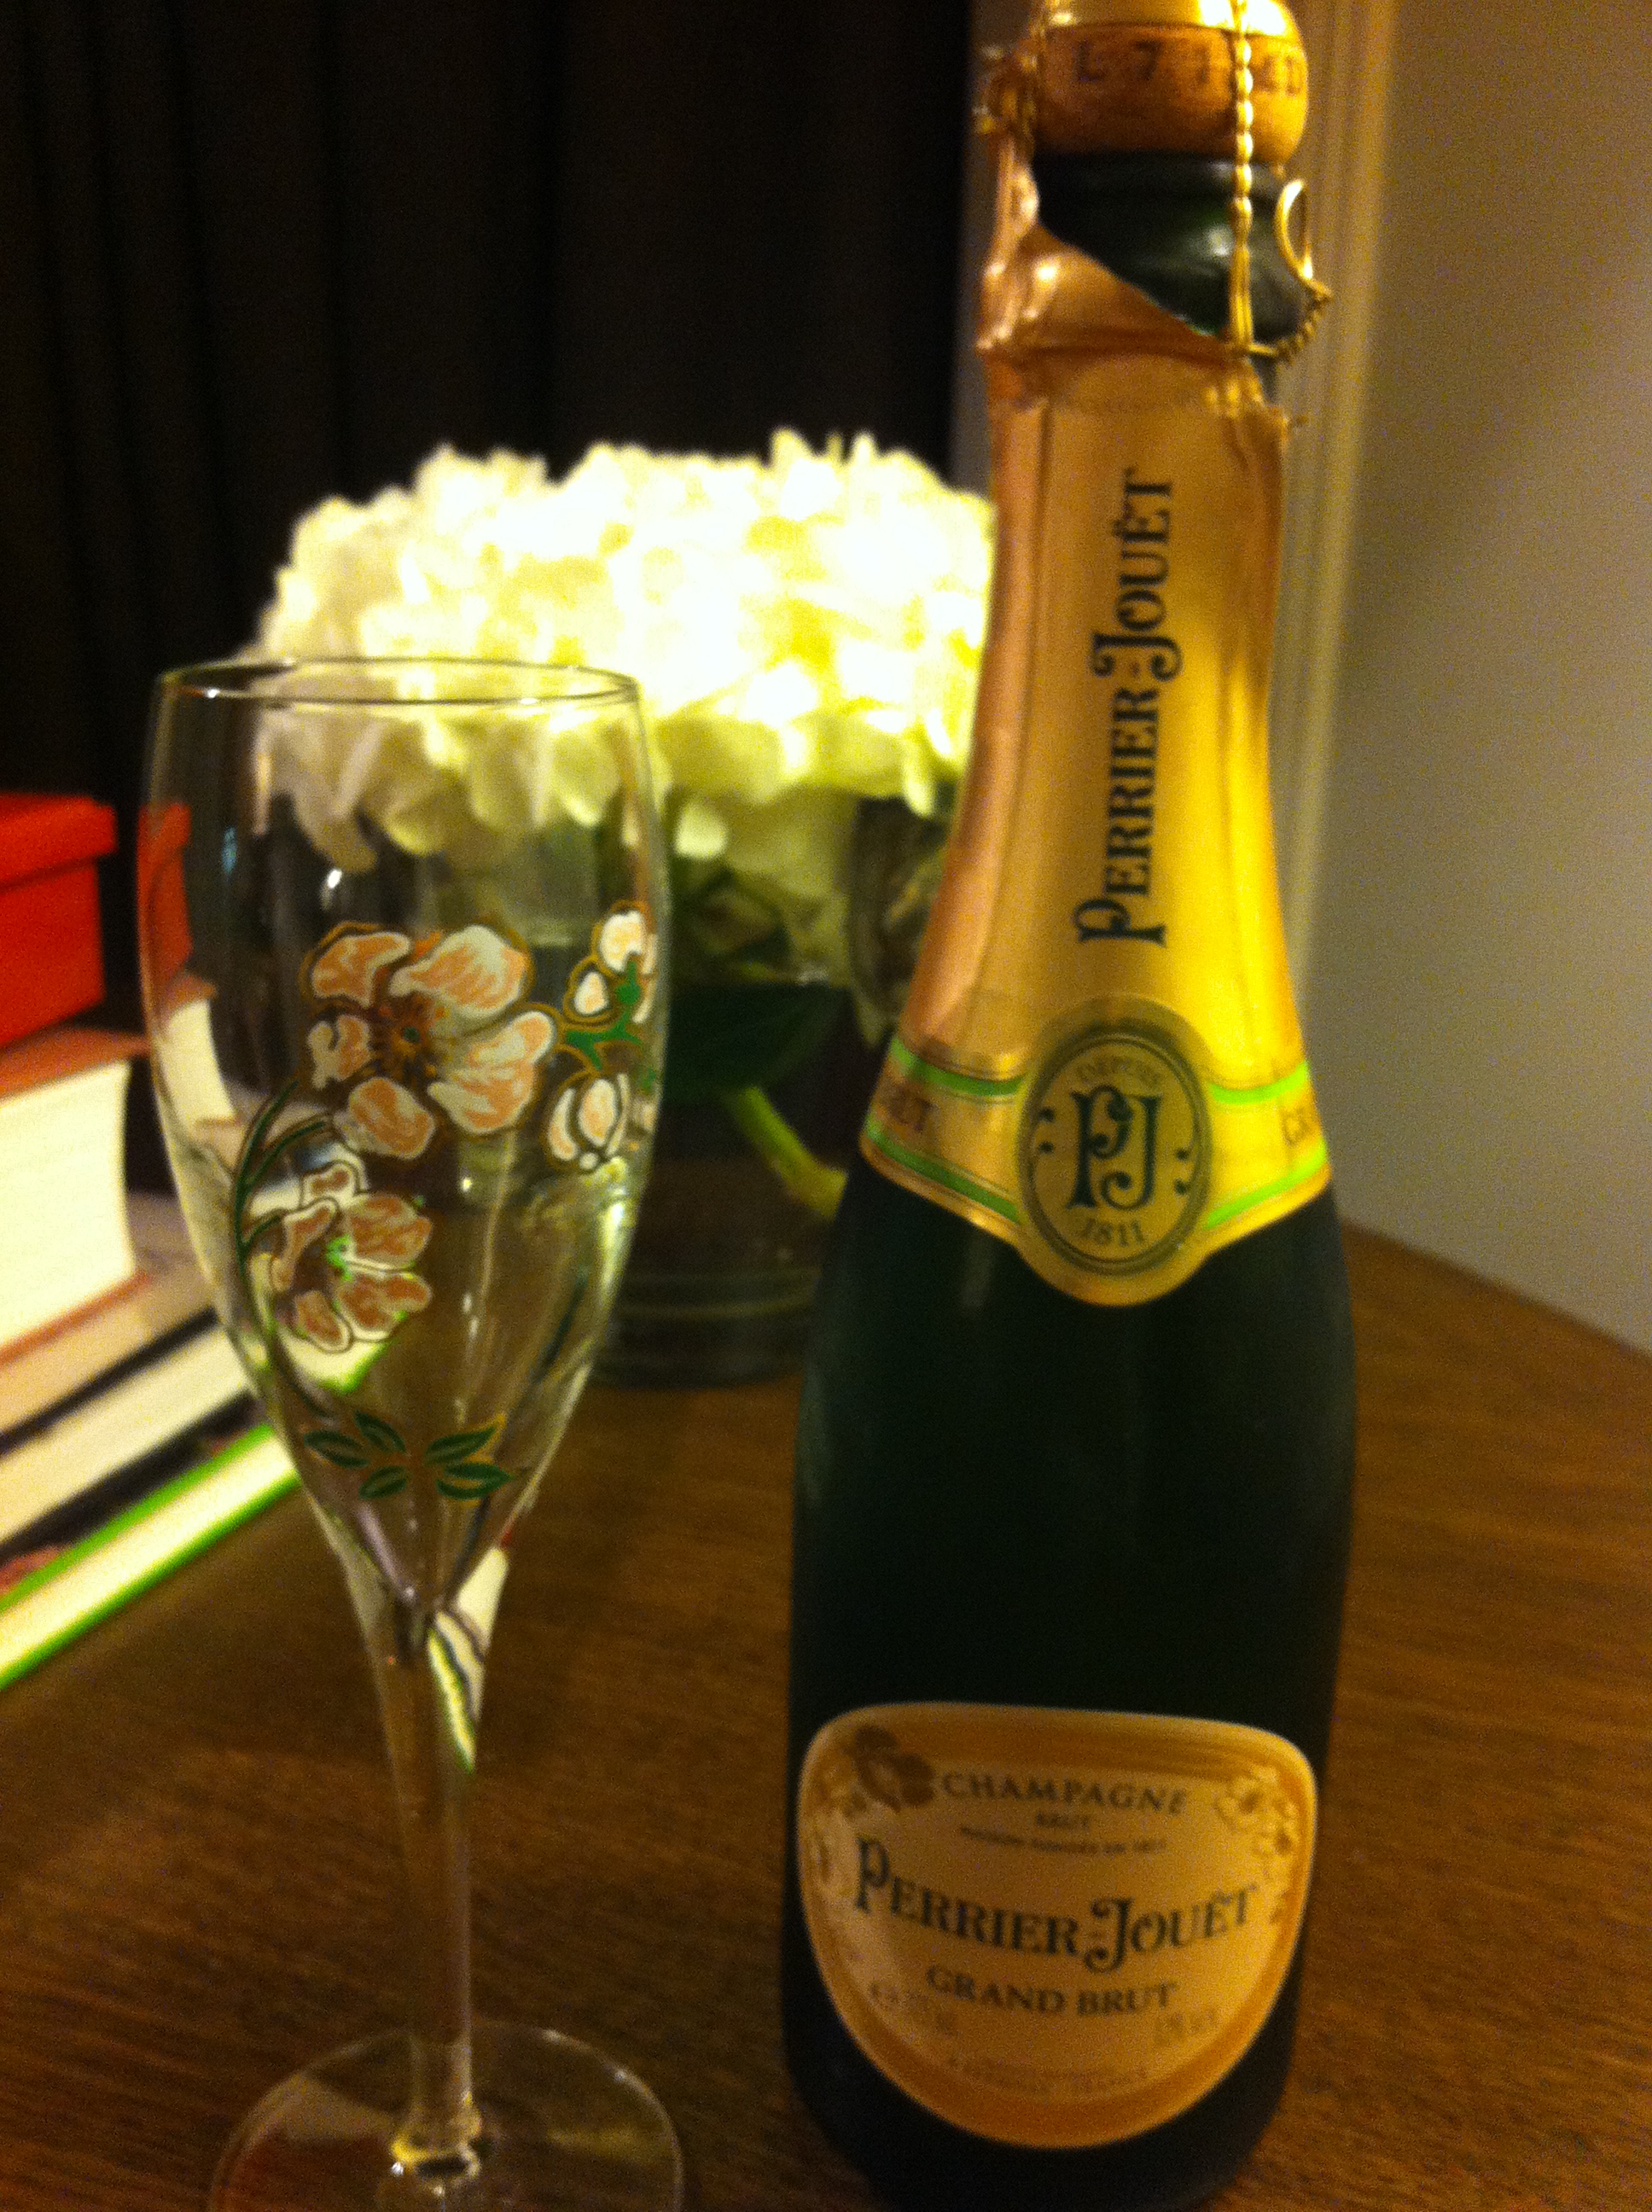  After a good workout in the hotel's fitness centre and a shower in the luxury bathroom, into the fluffy bathrobe and&nbsp;opened the&nbsp;Perrier Jouet Grand Brut from the mini bar!! 